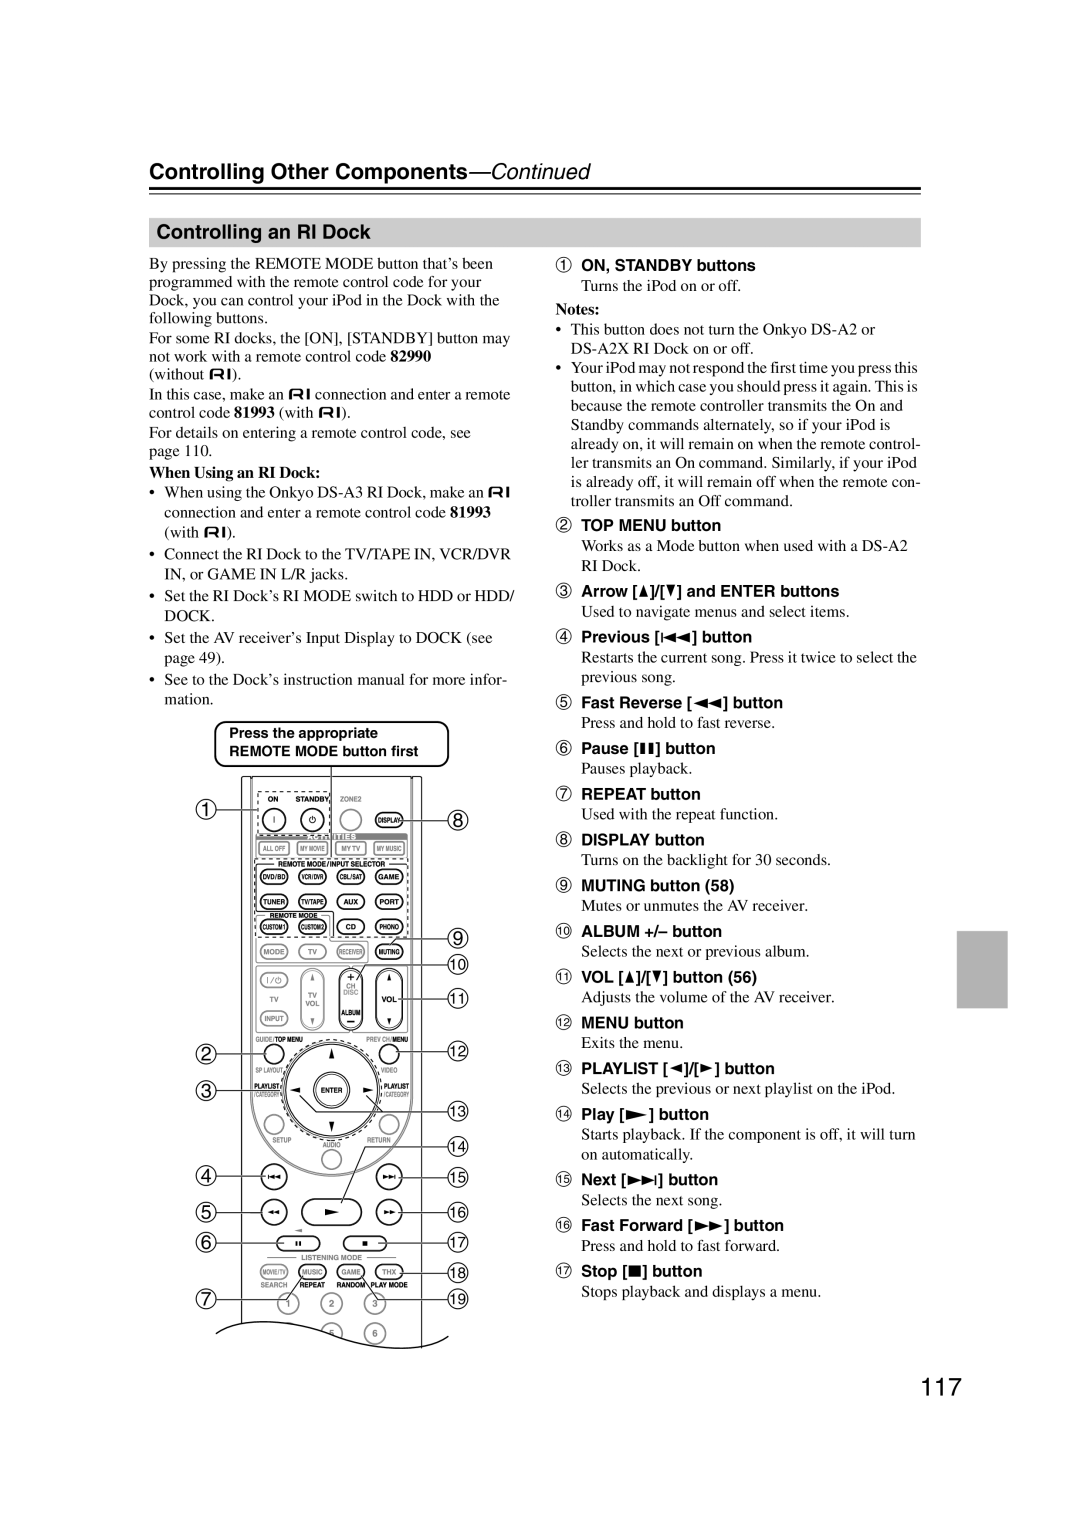 Onkyo TX-SR707 instruction manual Controlling Other Components—Continued 